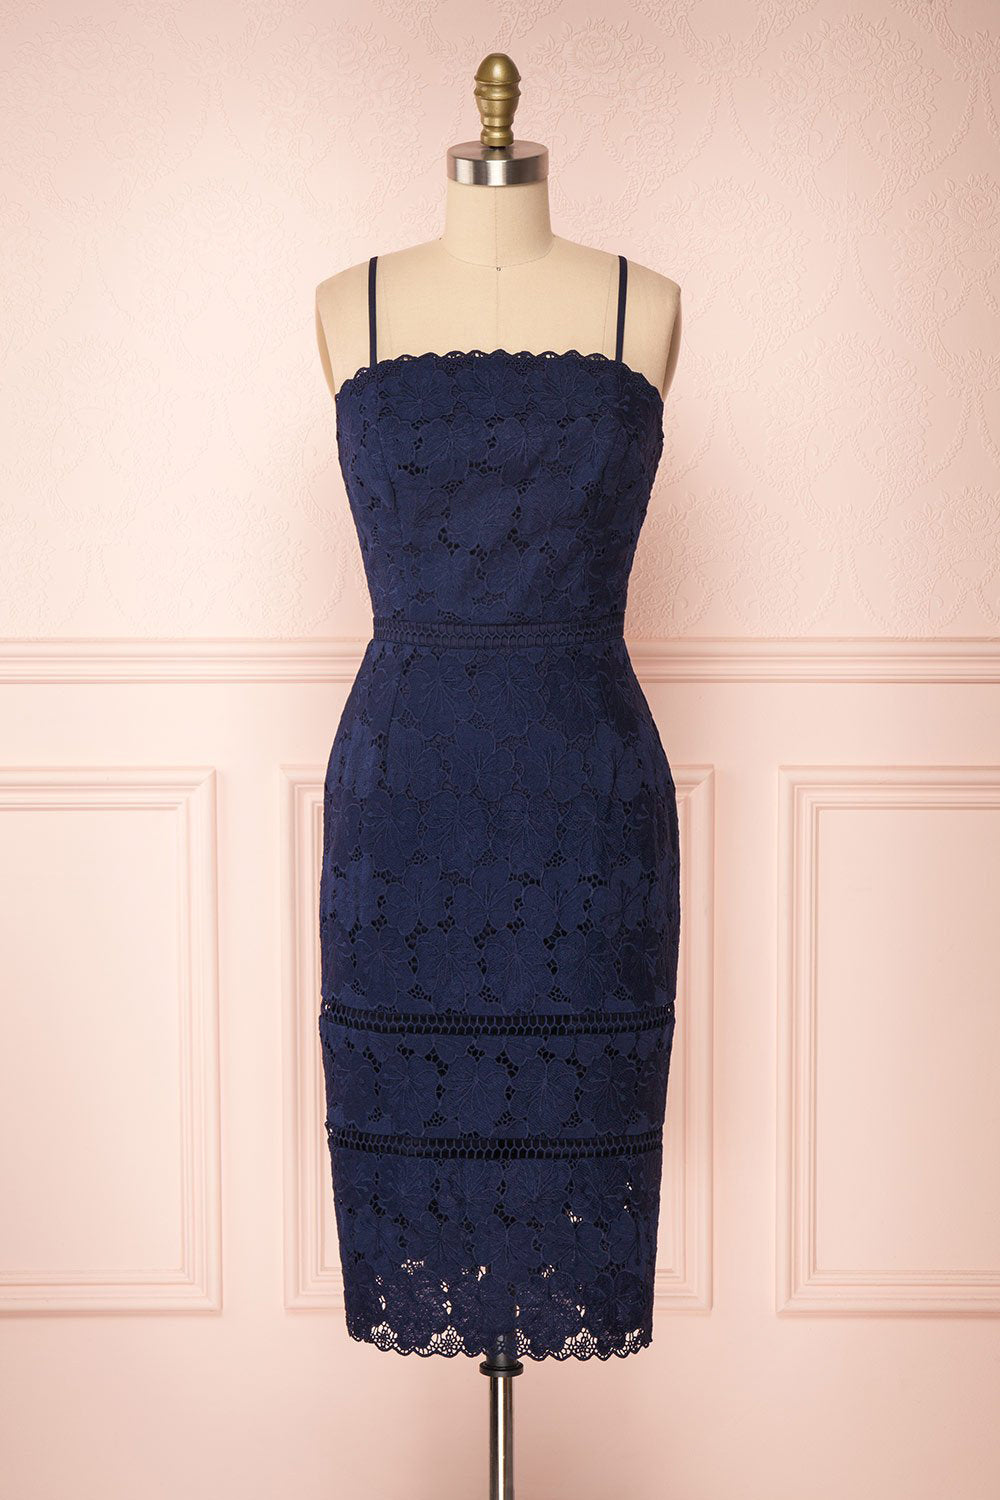 Wakanda Navy Crocheted Lace Cocktail Dress | Boutique 1861